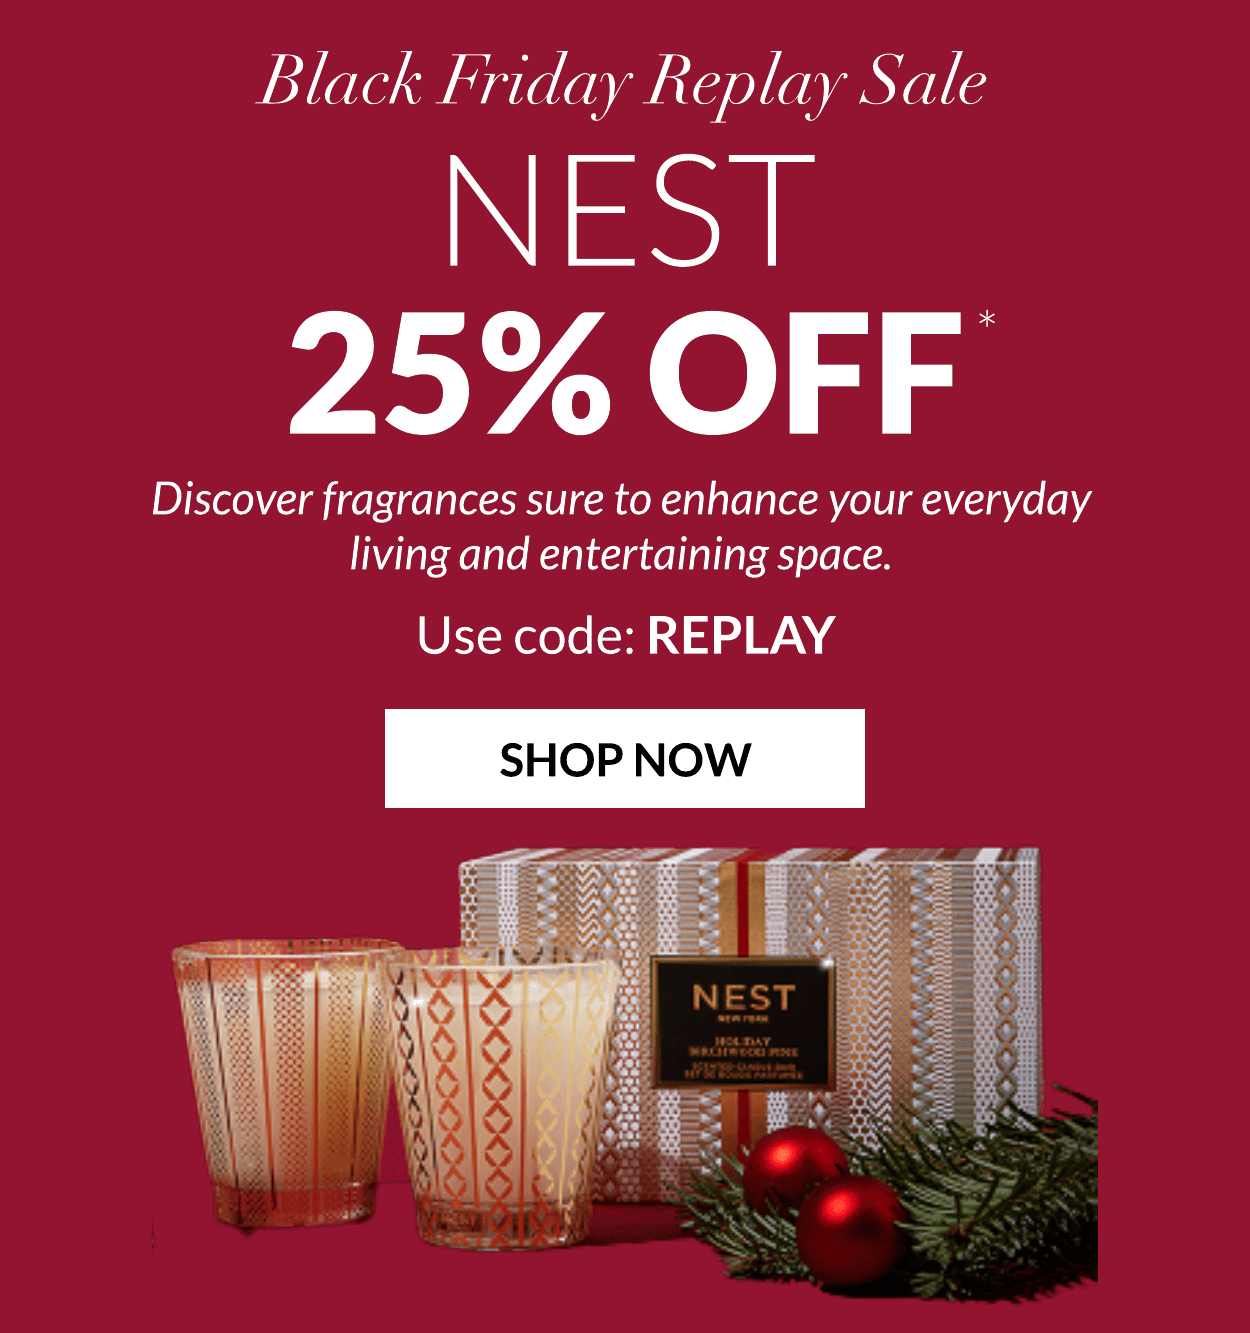 Black Friday Replay Sale NEST 25% OFF Discover fragrances sure to enhance your everyday living and entertaining space. Use code: REPLAY SHOP NOW 